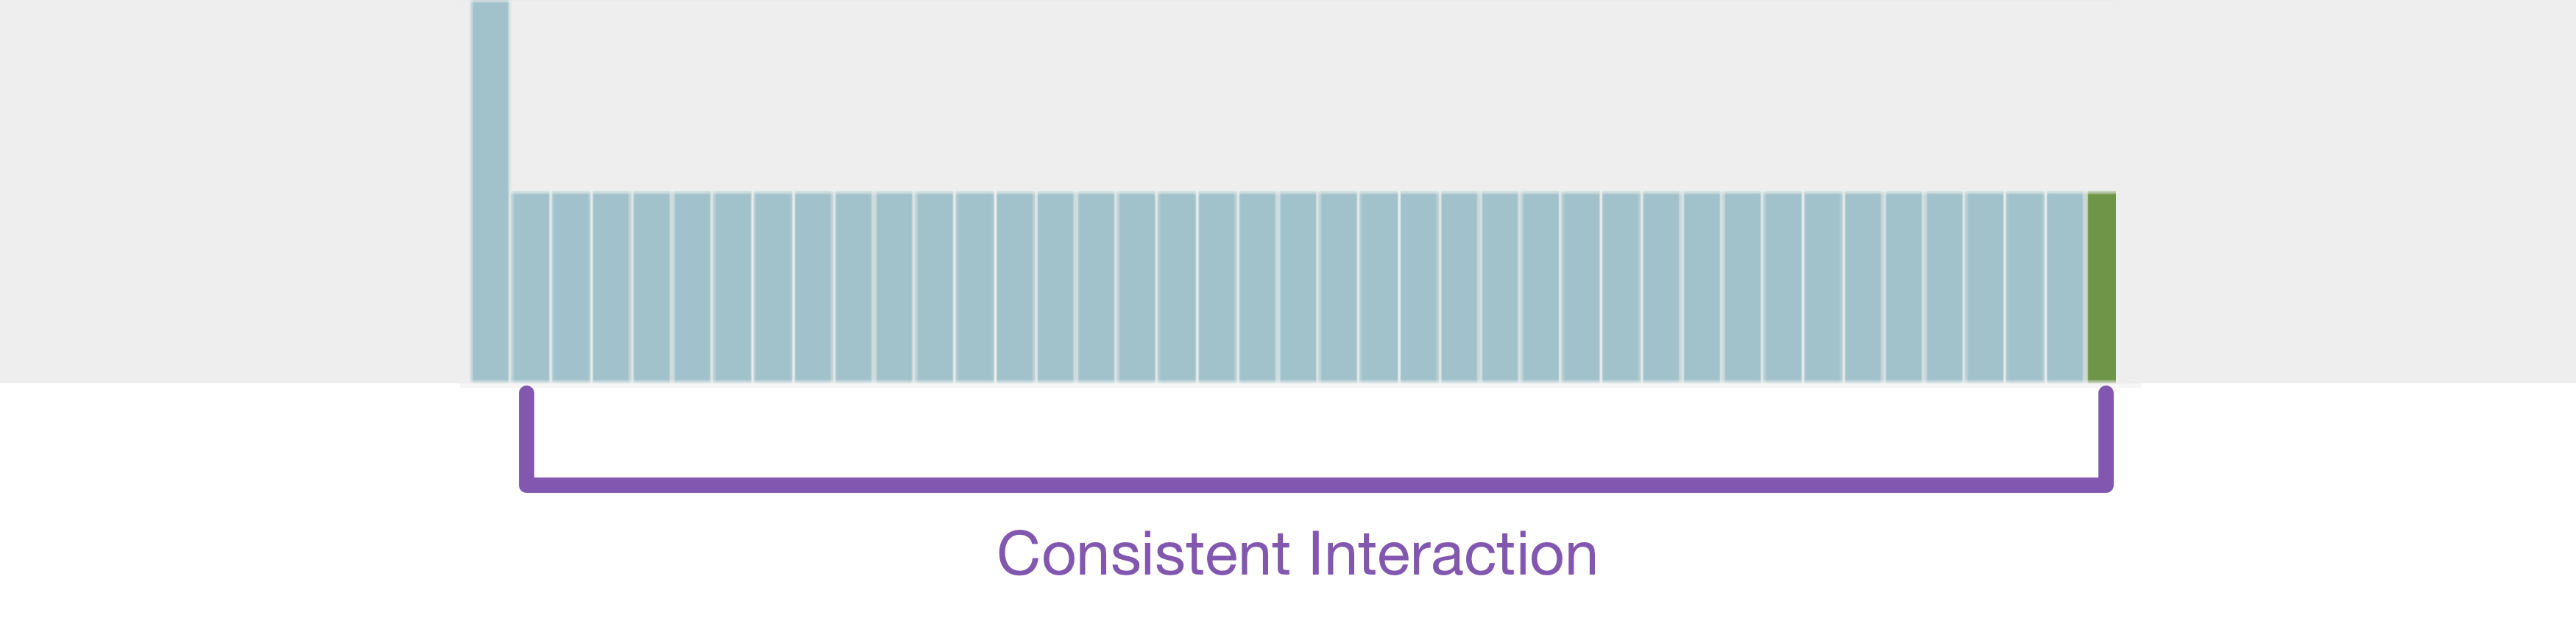 Overview - Consistent Interaction